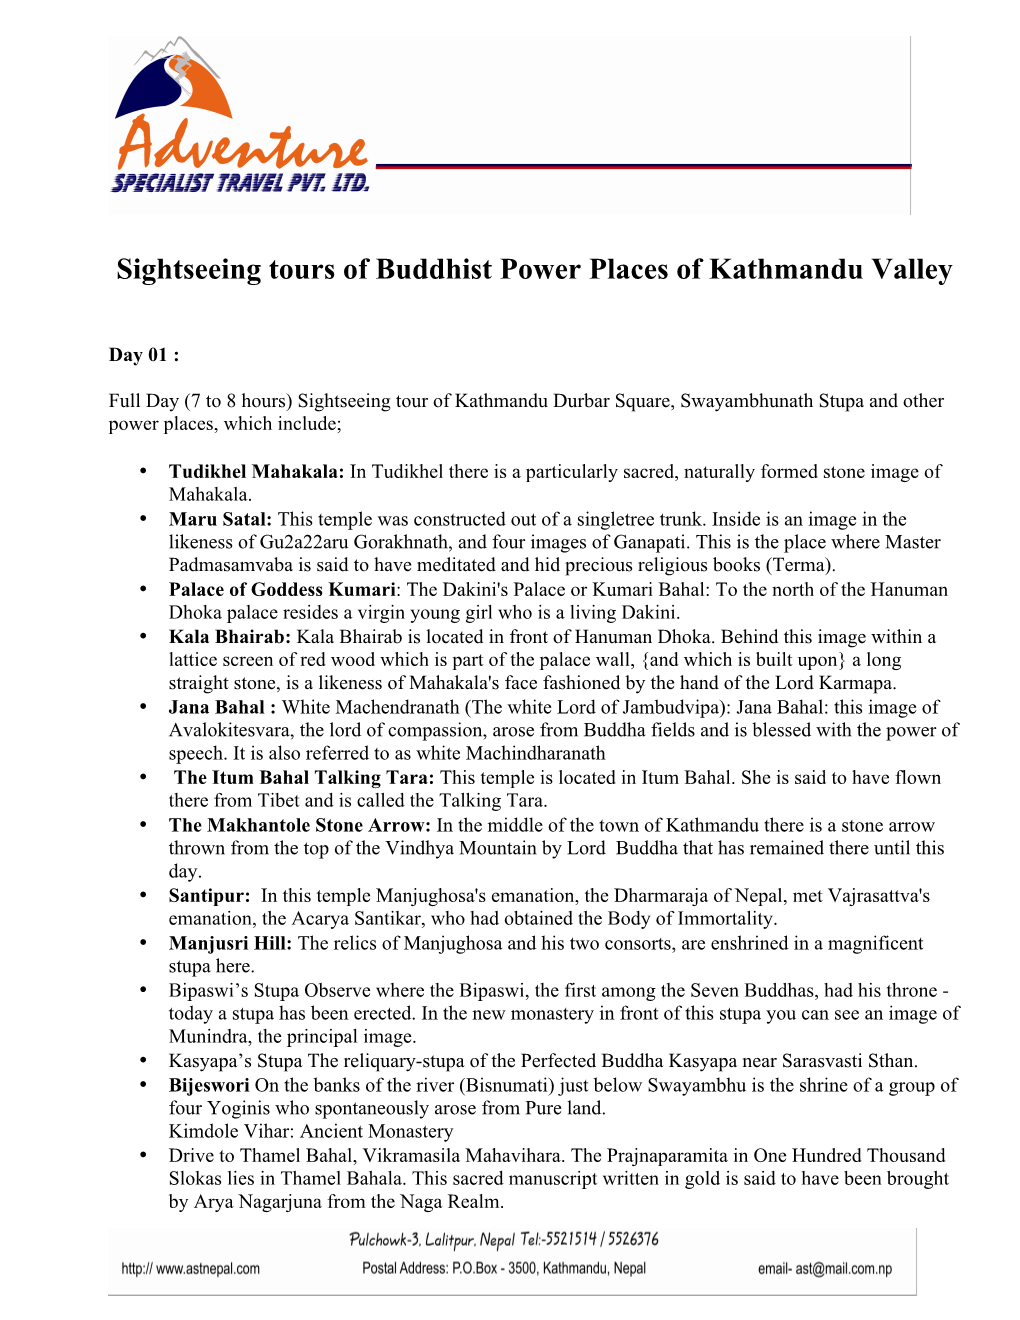 8 Days Itin of Buddhist Power Places in KTM Valley